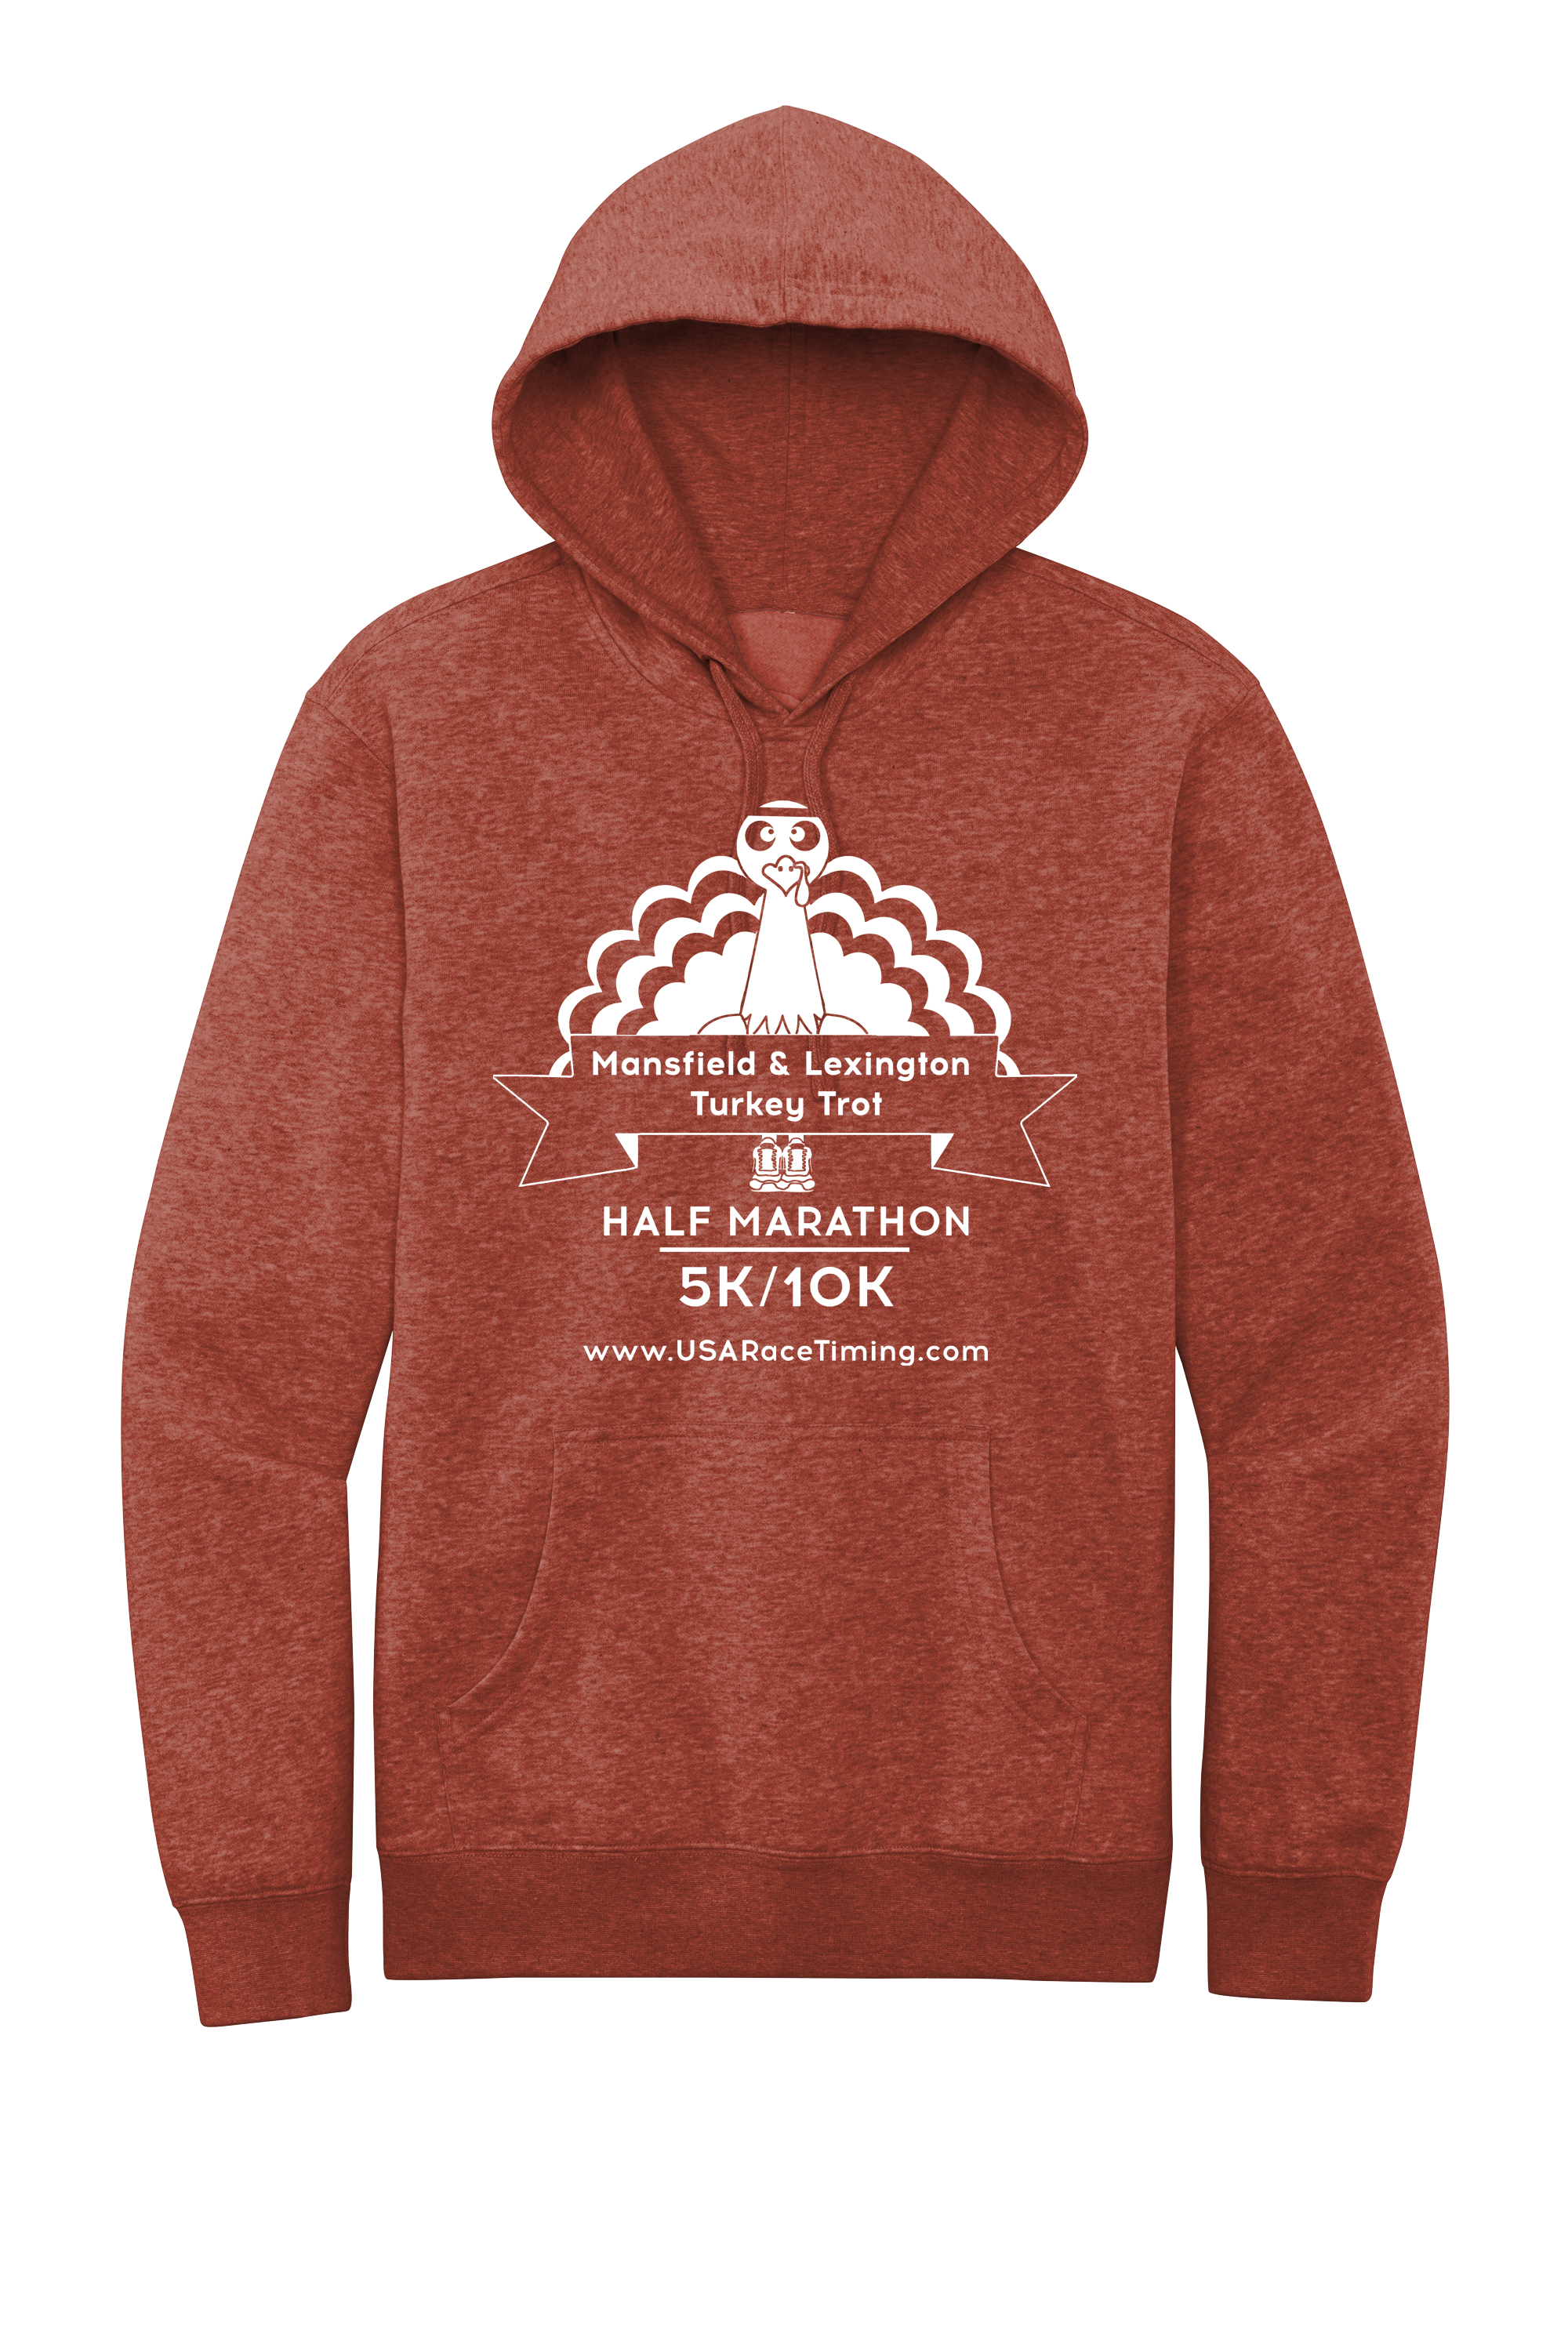 Mansfield & Lexington Ohio Turkey Trot Official Long Sleeve Hooded Sweatshirt - Heather Russet Orange With White Ink - Sport Tee Apparel Screen Printing - USA Race Timing - Heartland Church - Charity Race - 5k, 10k & Half Marathon - Heartland Church Lexington, Ohio - Best Turkey Trot Swag In Ohio